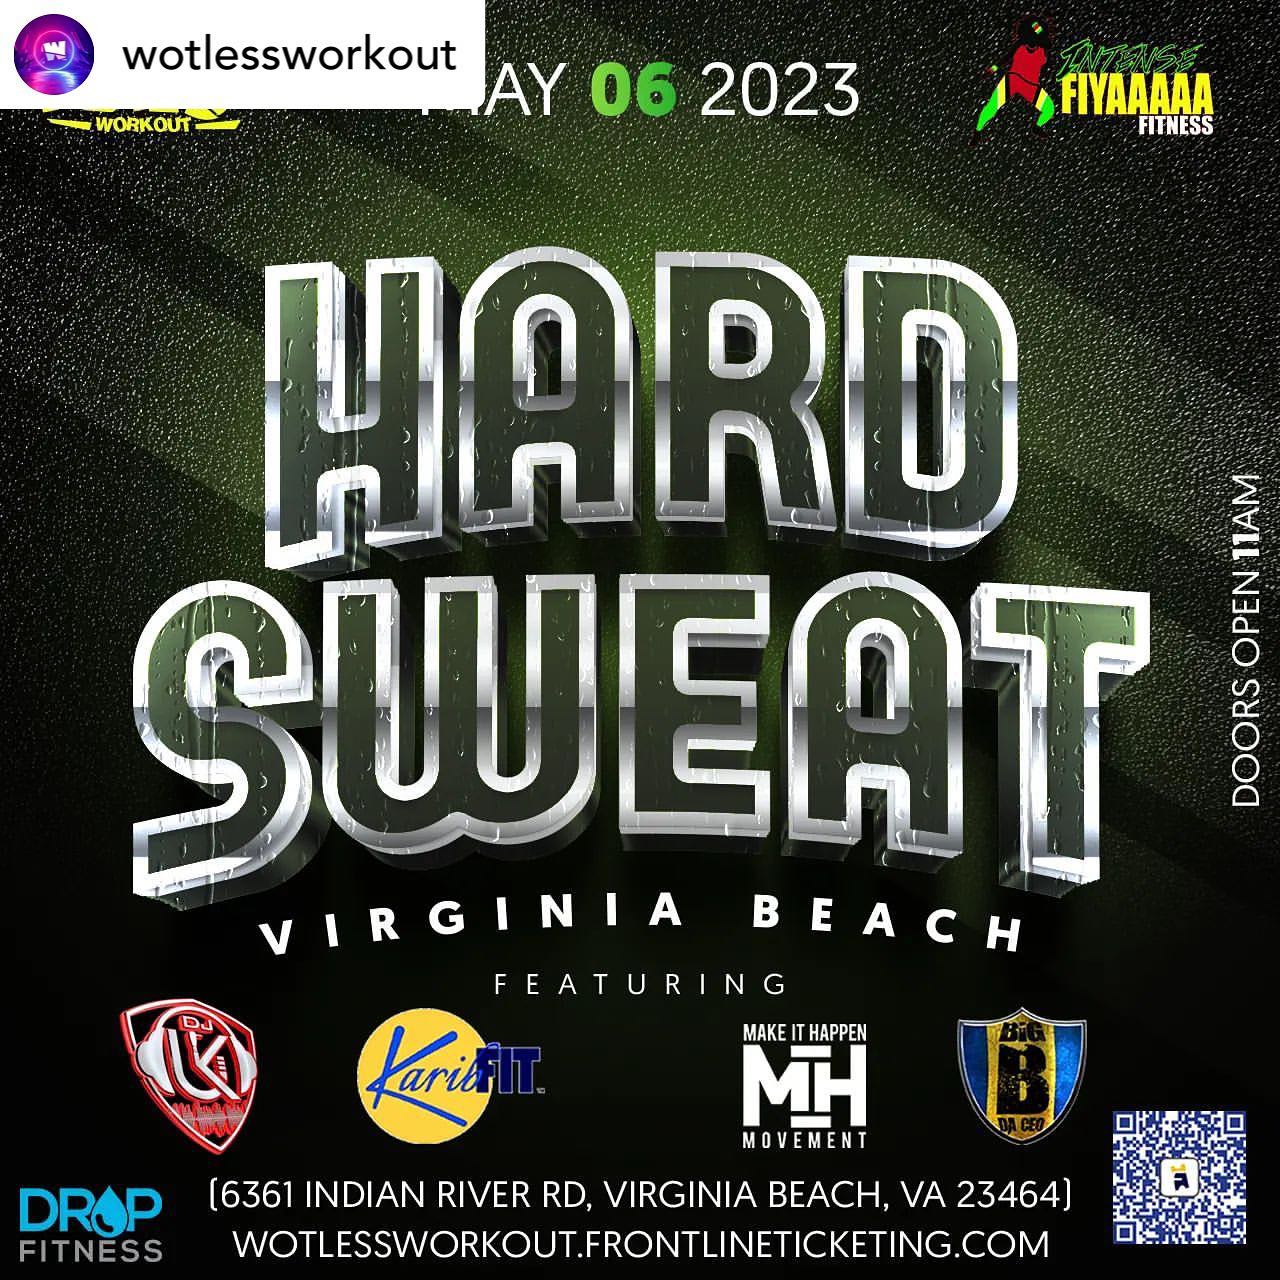 VIRGINIA BEACH GET READY , @WOTLESSWORKOUT, HARD SWEAT TOUR HEADS TO VIRGINIA BEACH.

SATURDAY ,MAY 6, 2023

FEATURING @KARIBFIT , @mr_makeithappen , @bigbdaceo , and many more. 

HOSTED  BY VIRGINIA'S  OWN @intensefiyaaaaafitness 

ALL ROADS LEADS TO @dropfitnessva

 6361 Indian River Rd, Virginia Beach..

GATES OPEN 11AM

*** $20 TICKETS AVAILABLE ***
 FIRST COME FIRST SERVE
(Tickets are on a first come first serve basis )

TICKETS ARE AVAILABLE  AT
WOTLESSWORKOUT.FRONTLINETICKETING.COM

GRAB YOUR CREW AND MEET US AND LETS GET ON WOTLESS!

FOLLOW US ON SOCIAL MEDIA  @WOTLESSWORKOUT 

EMAIL: WOTLESSWORKOUT@GMAIL.COM 

PLEASE SHARE !!!